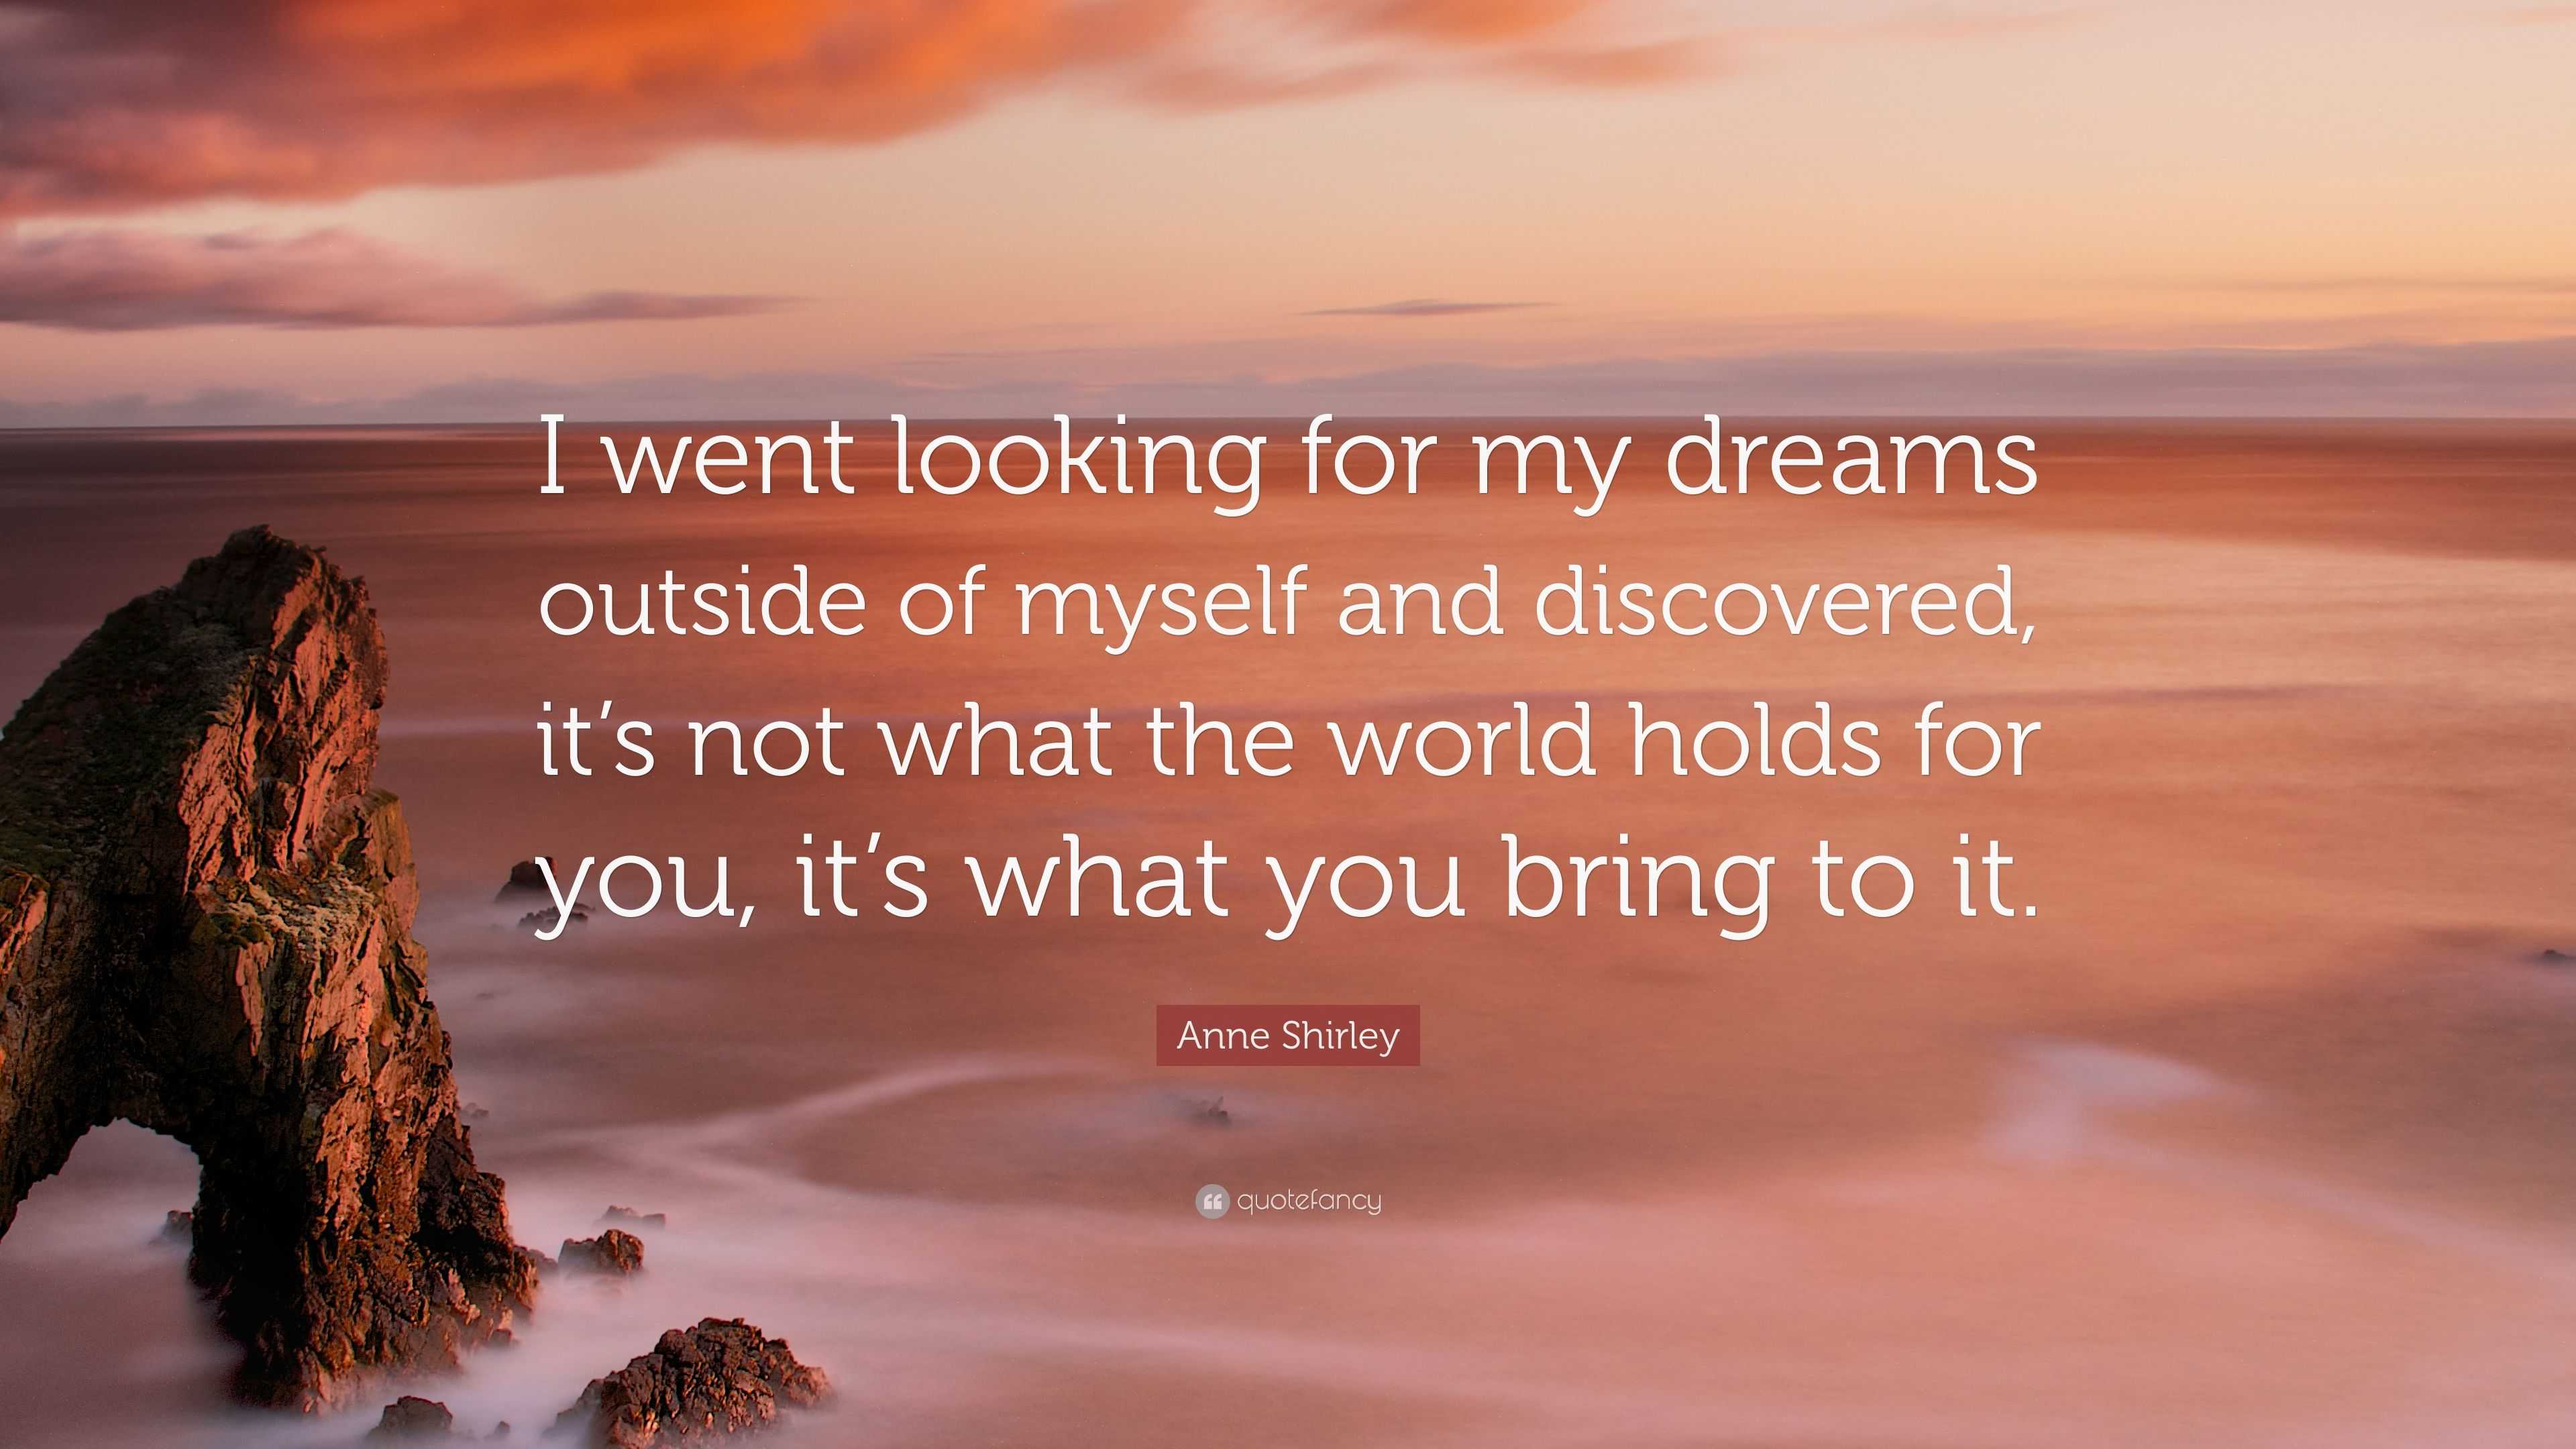 Anne Shirley quote: I went looking for my dreams outside of myself